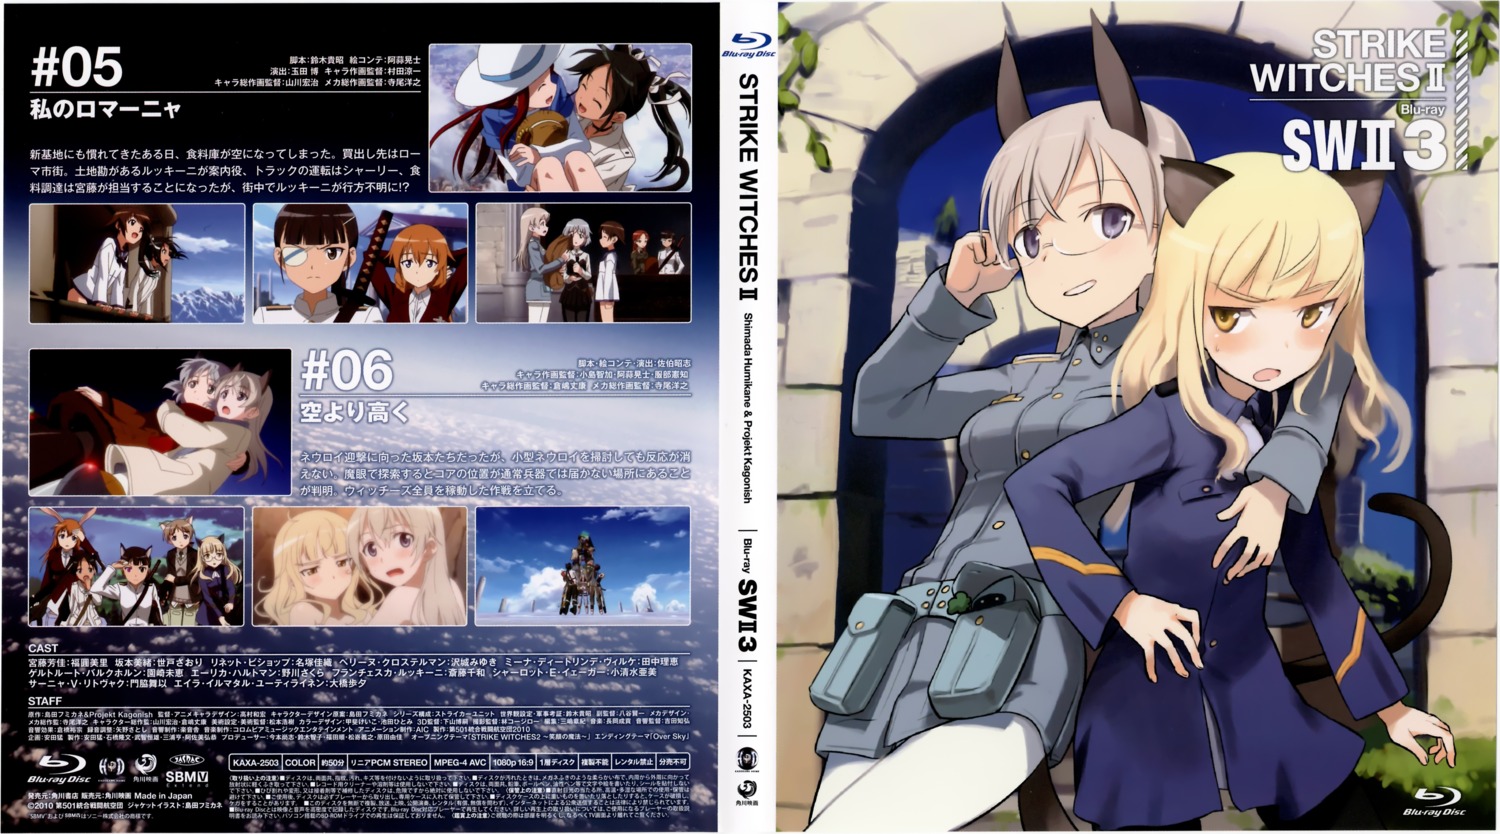 Shimada Humikane Strike Witches Perrine H Clostermann Animal Ears Disc Cover Megane Overfiltered Yande Re